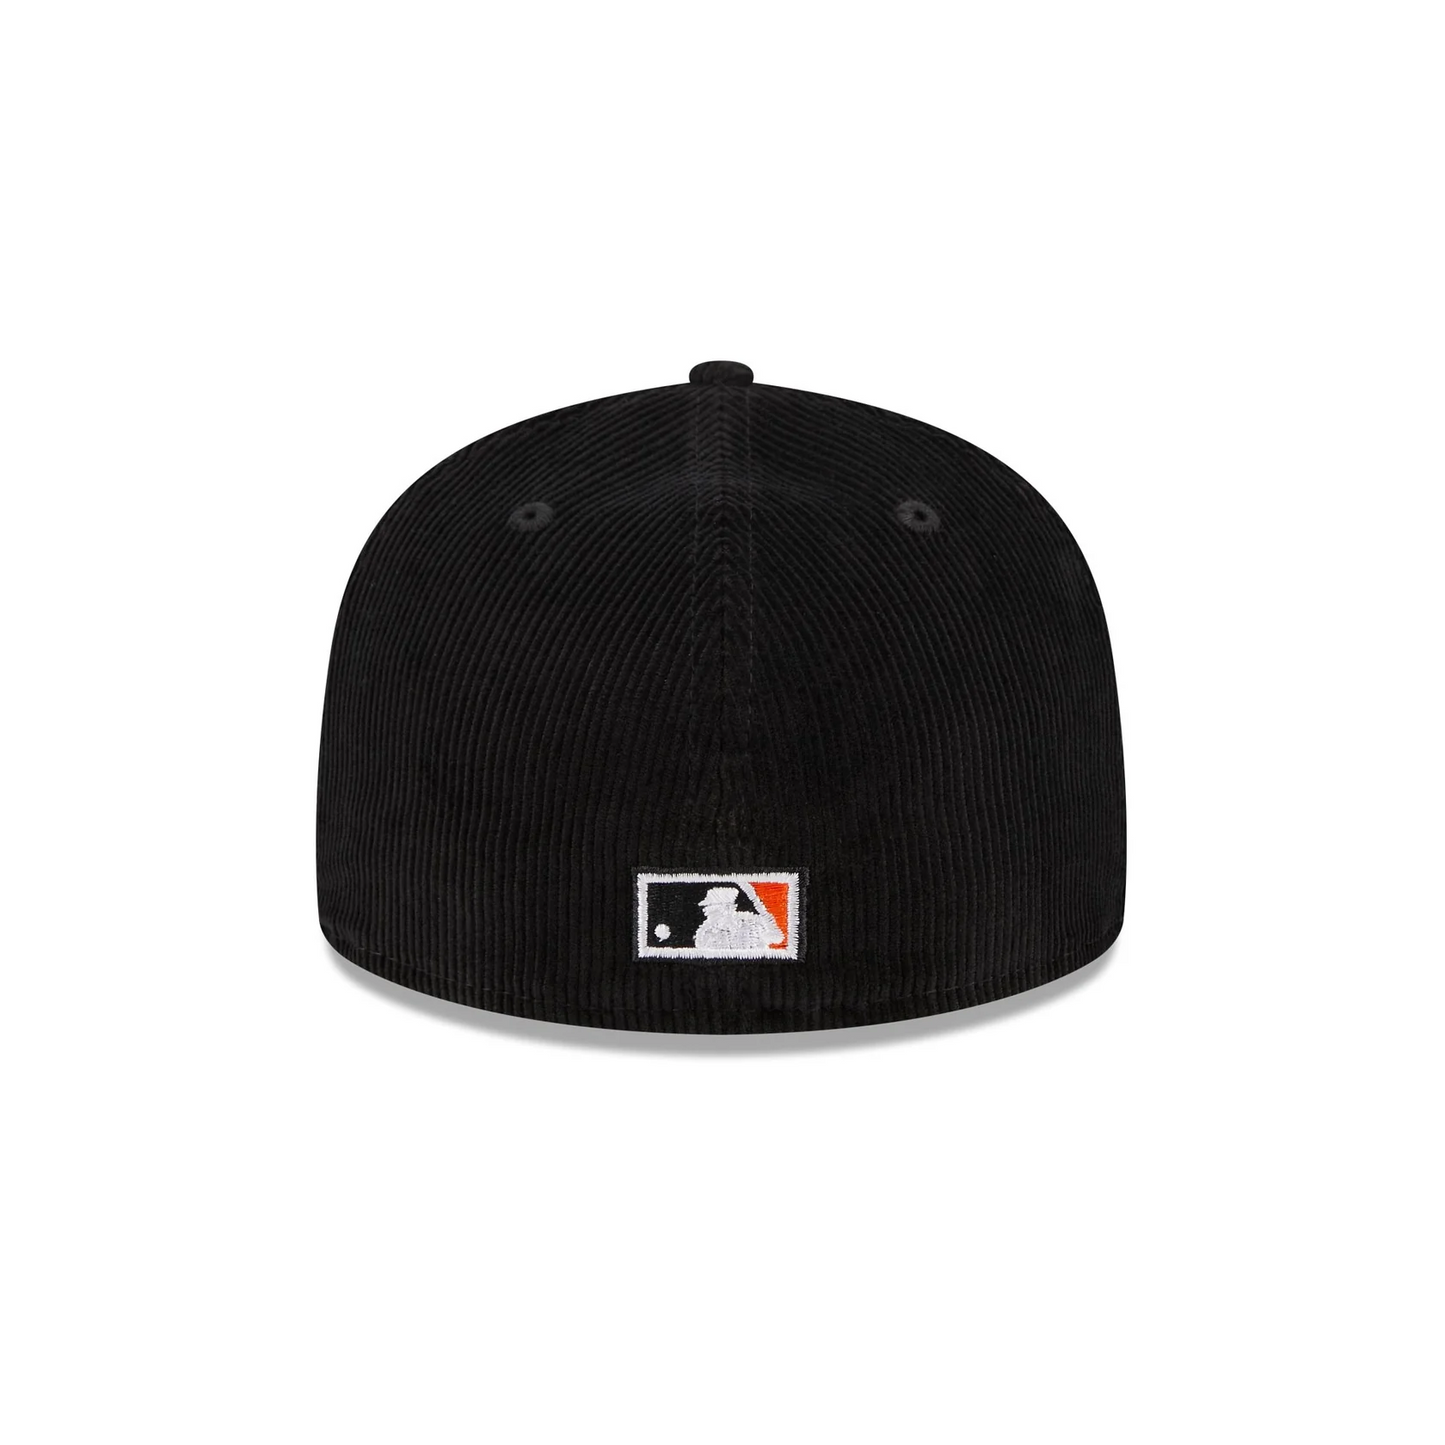 SAN FRANCISCO GIANTS THROWBACK CORD 59FIFTY FITTED HAT